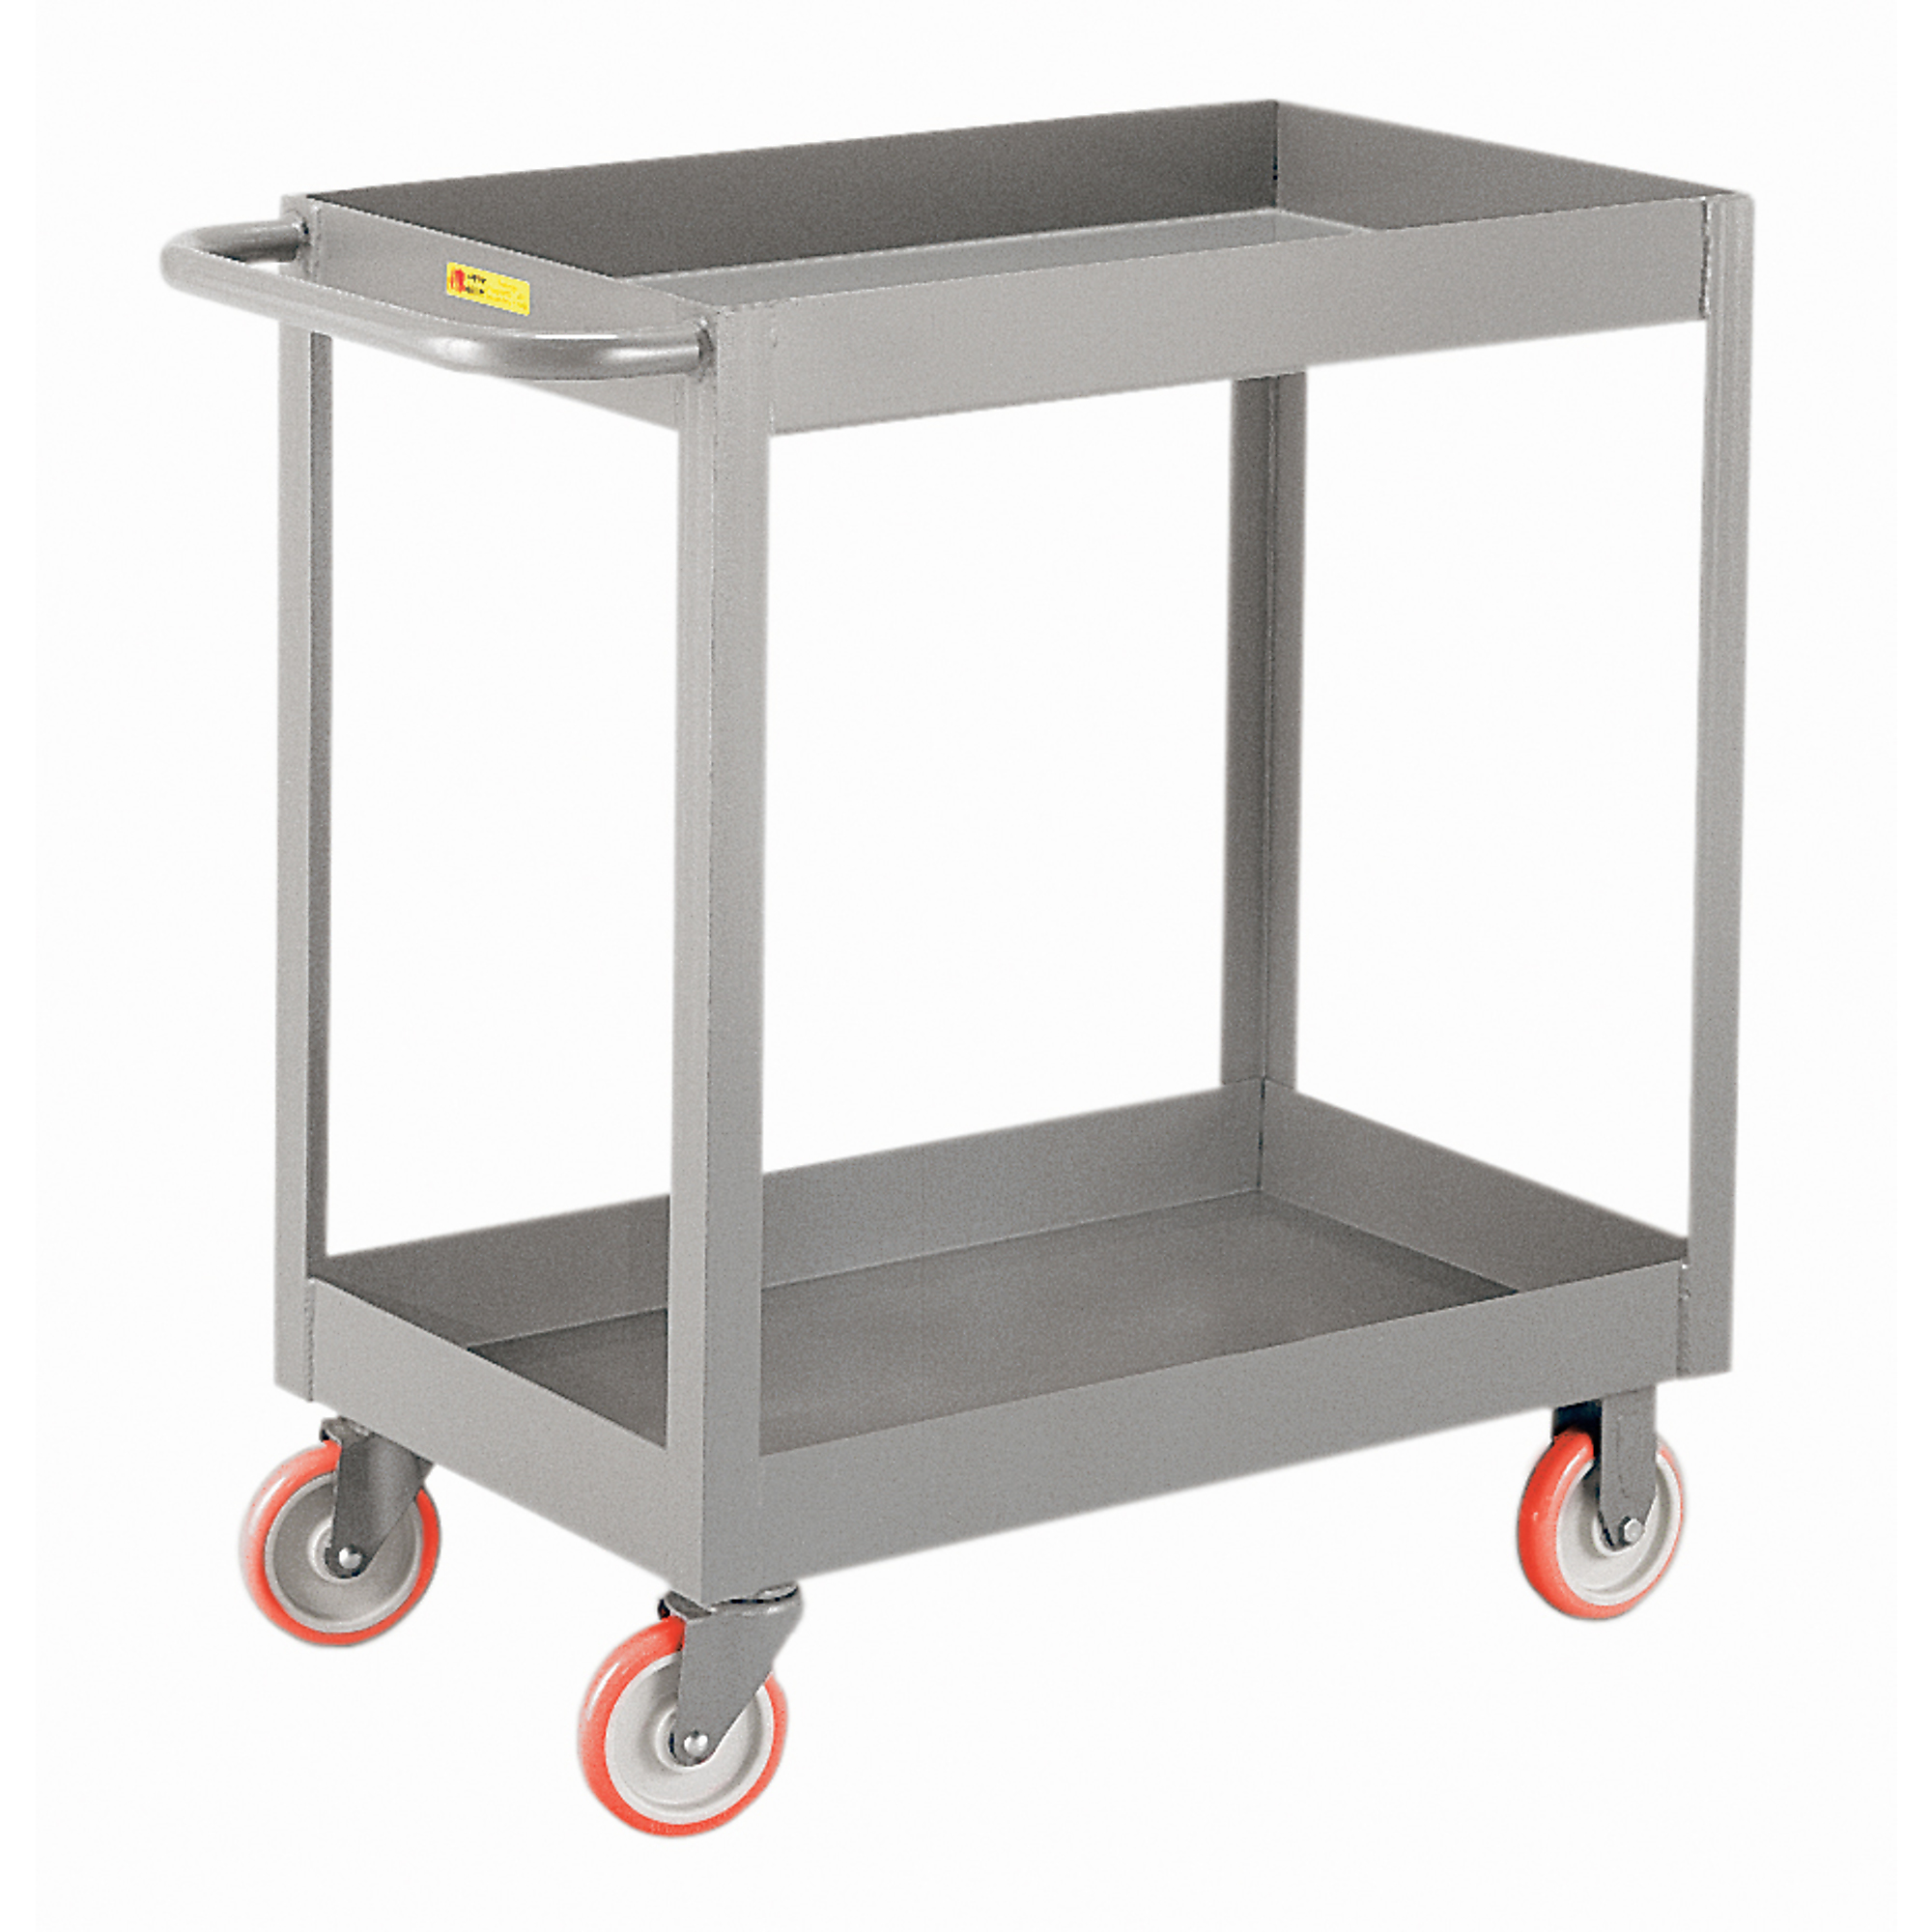 Little Giant, 3Inch Deep Shelf Truck, 24x36, 1200 lbs, Total Capacity 1200 lb, Shelves (qty.) 2, Material Carbon Steel, Model DS2436X3-5PY